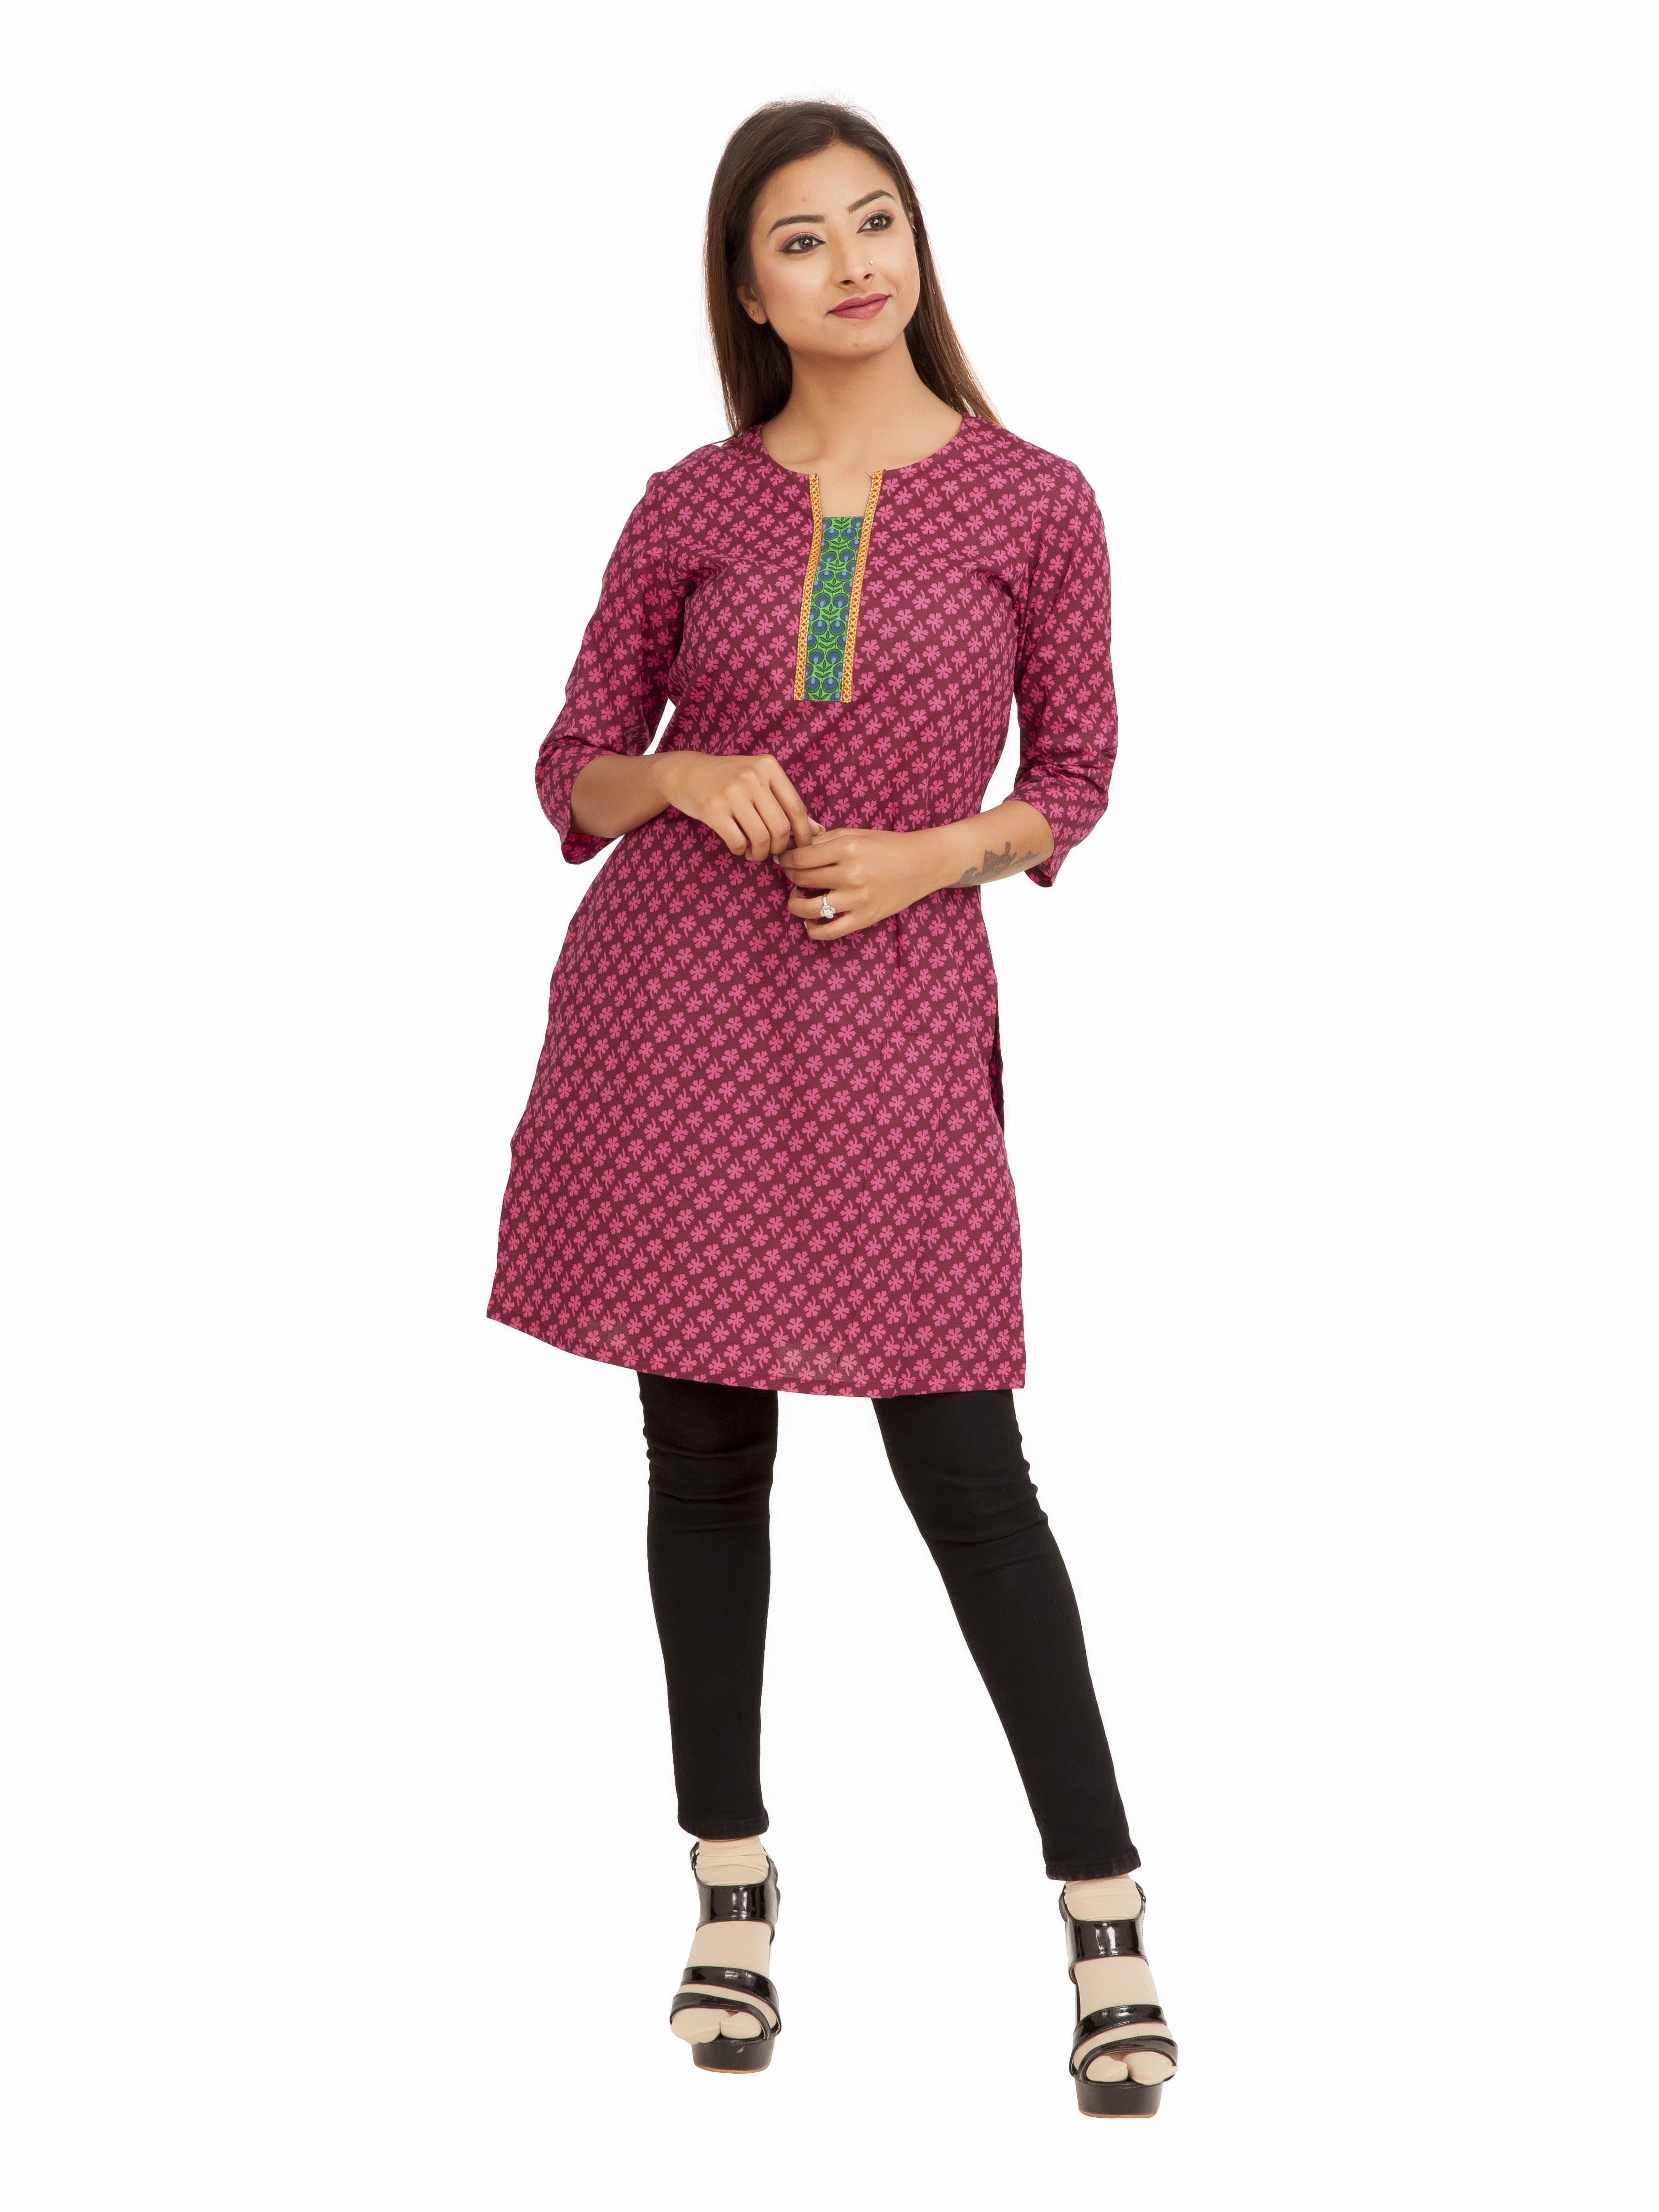 Women's Clothing Wholesale Suppliers in India